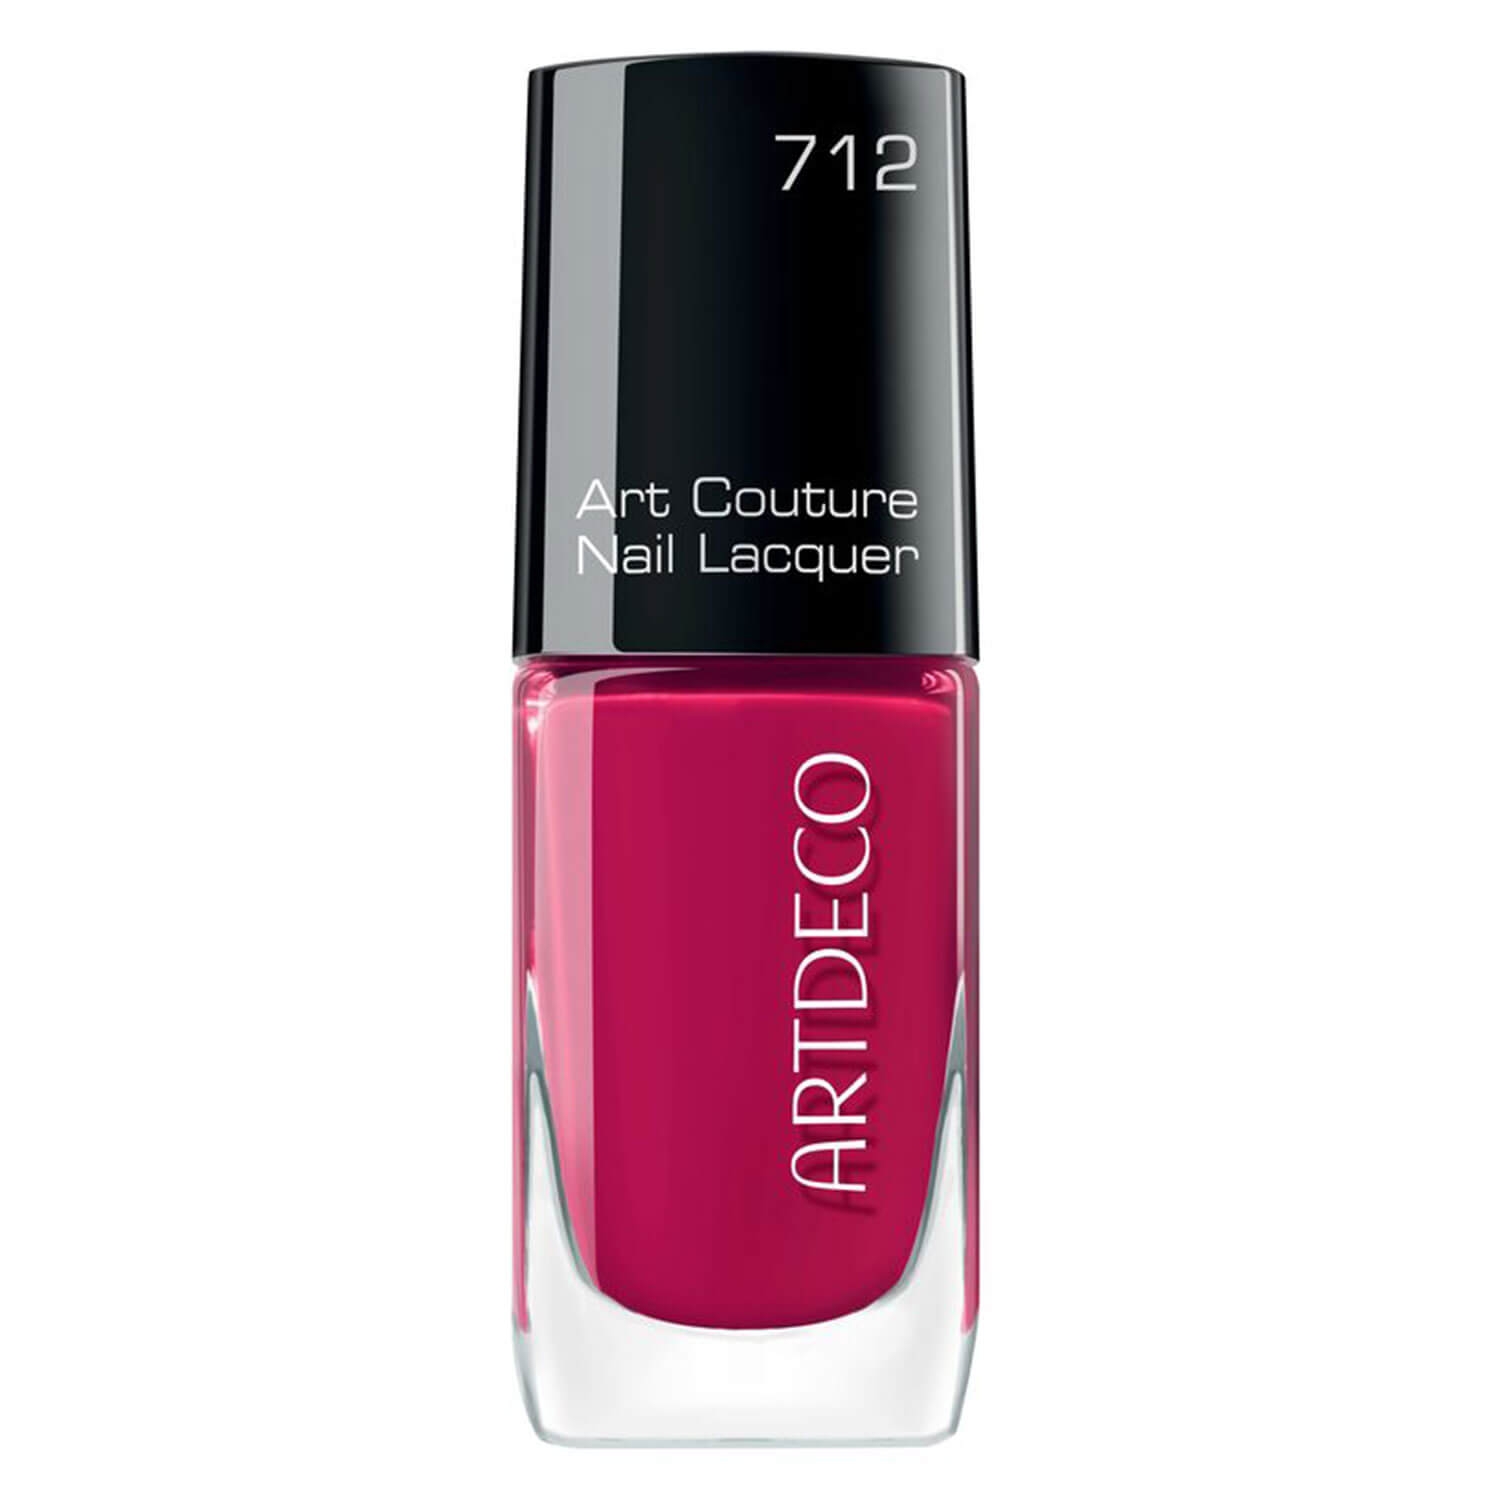 Product image from Art Couture - Nail Lacquer Bougainvillea 712